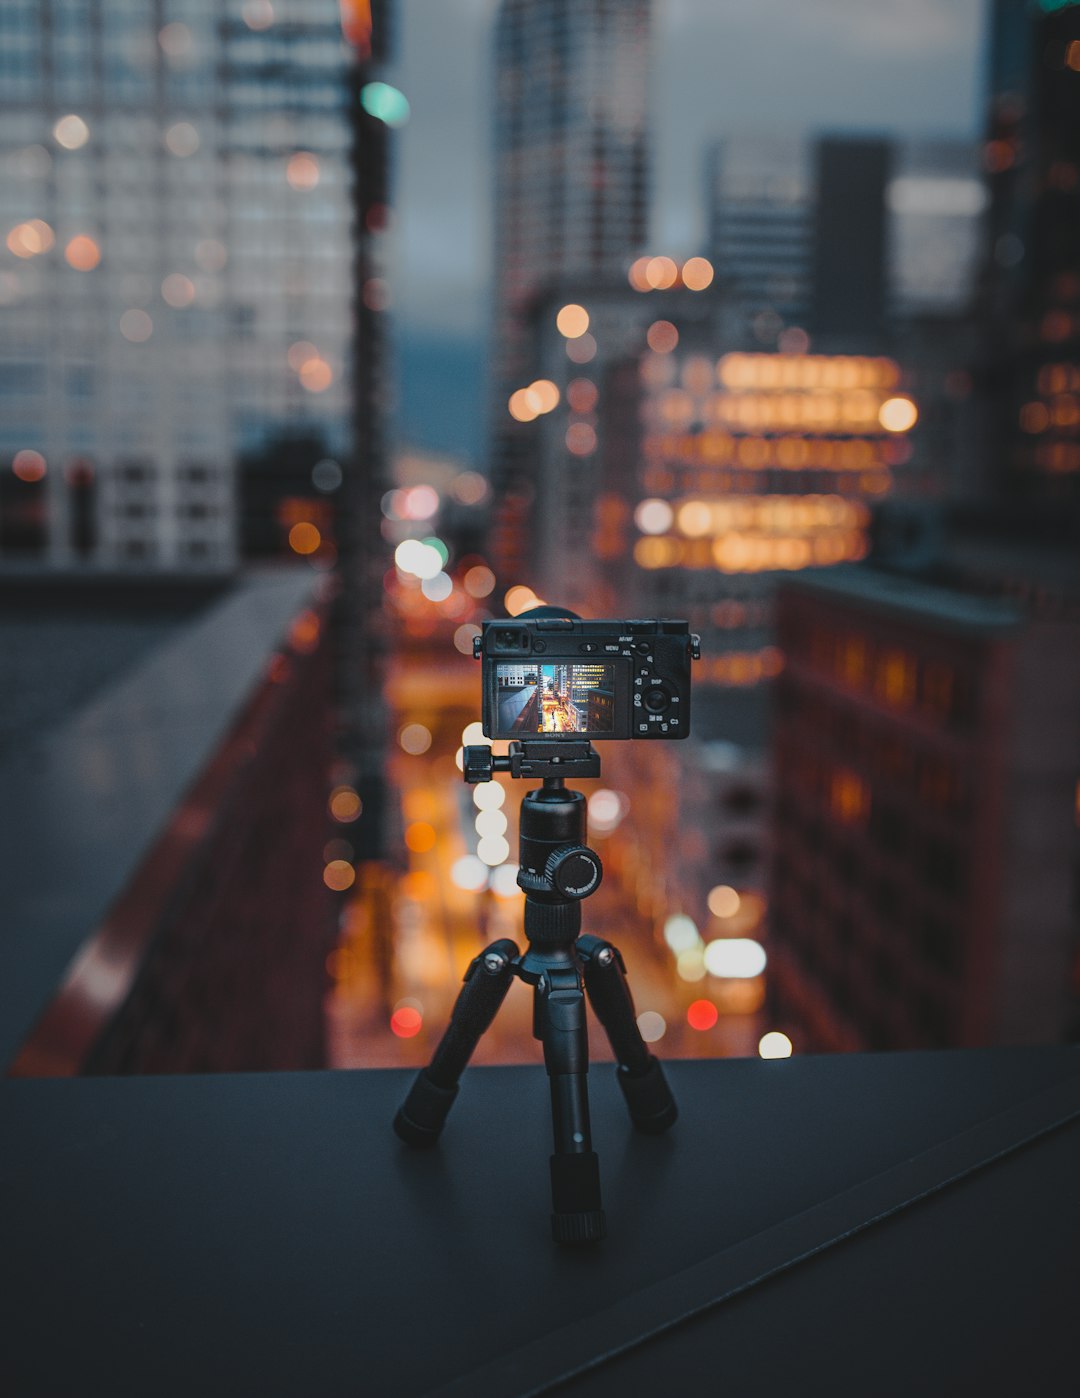 camera on tripod on building roof ledge at the city during night